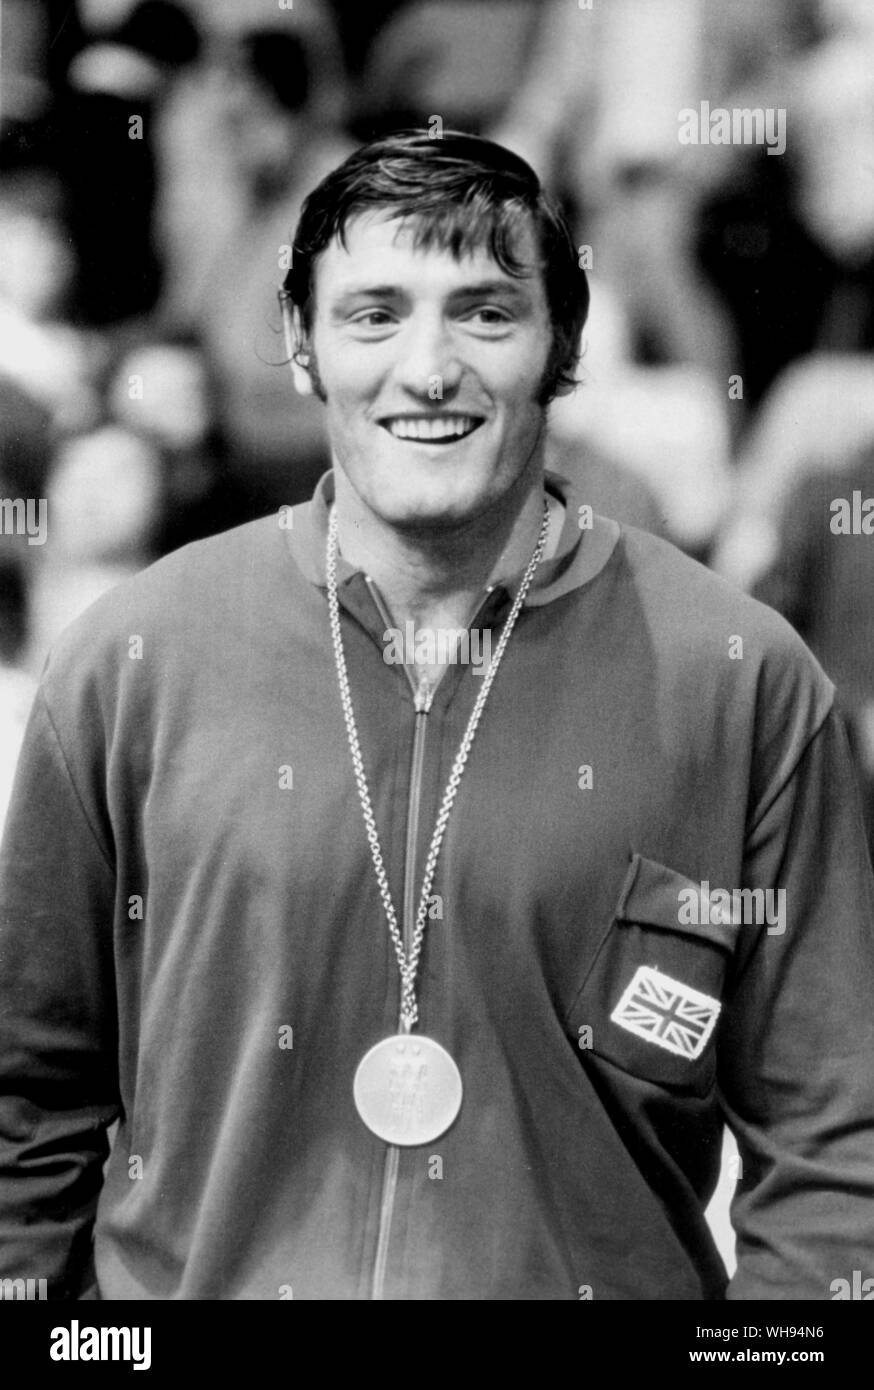 September 1972: Munich Olympics. Dave Seabrook, light-heavy weight judo competition. Stock Photo